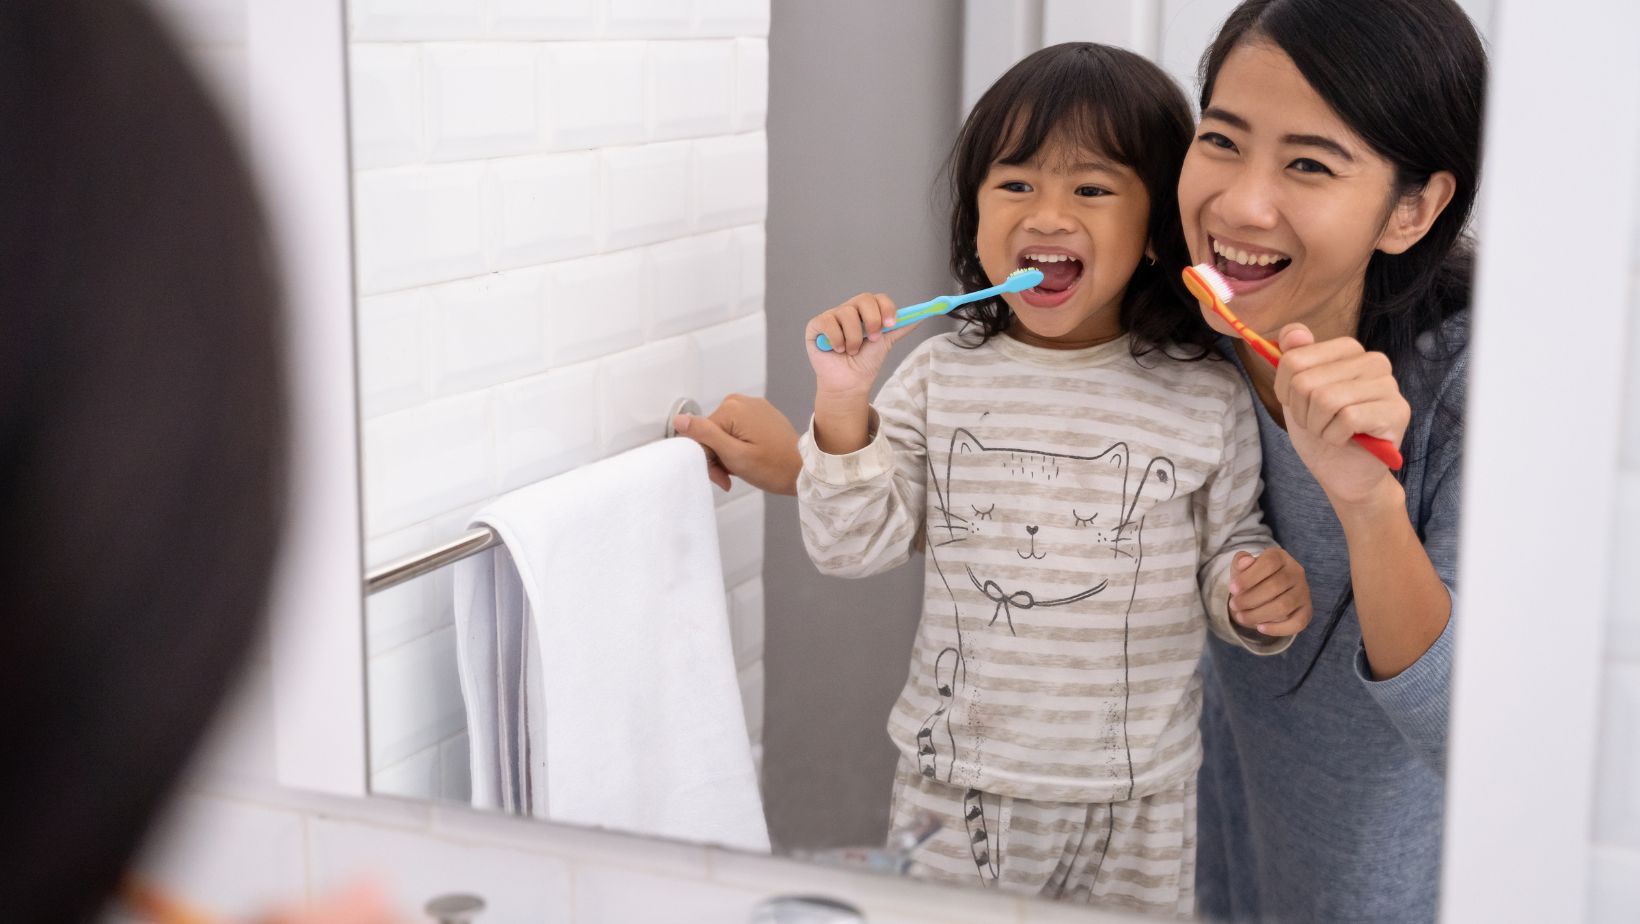 when teaching children to brush their teeth, we almost always use most-to-least prompting